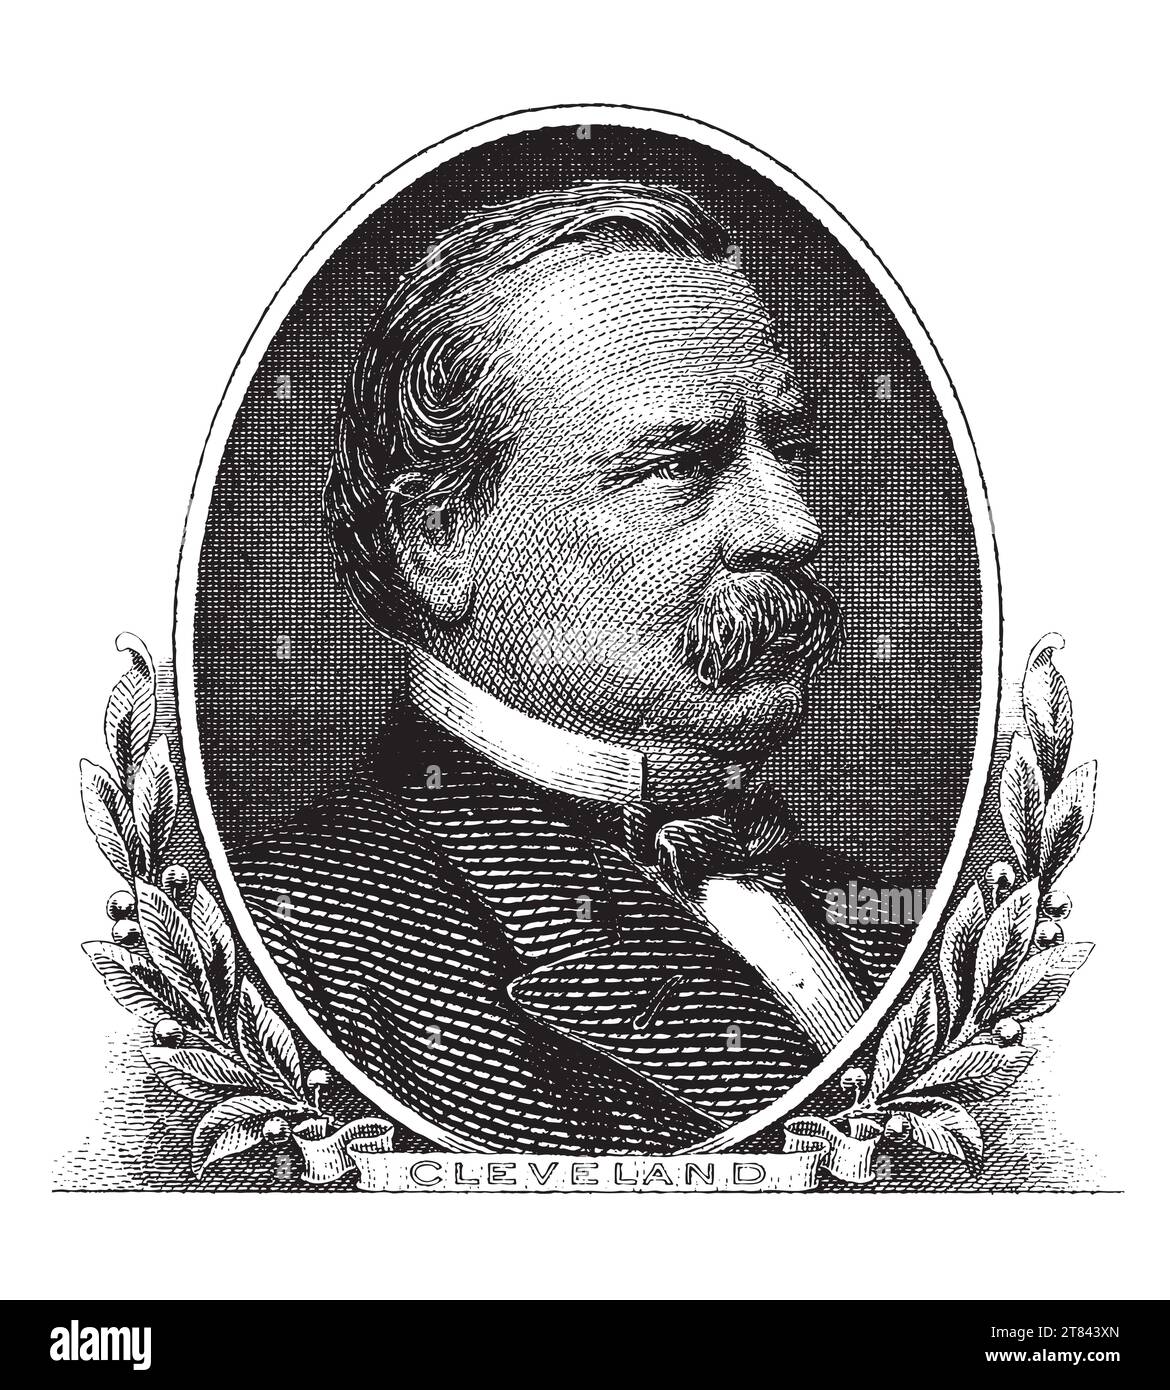 Vintage engraving style vector illustration of Grover Cleveland, the 22th and 24th president of the United States Stock Photo